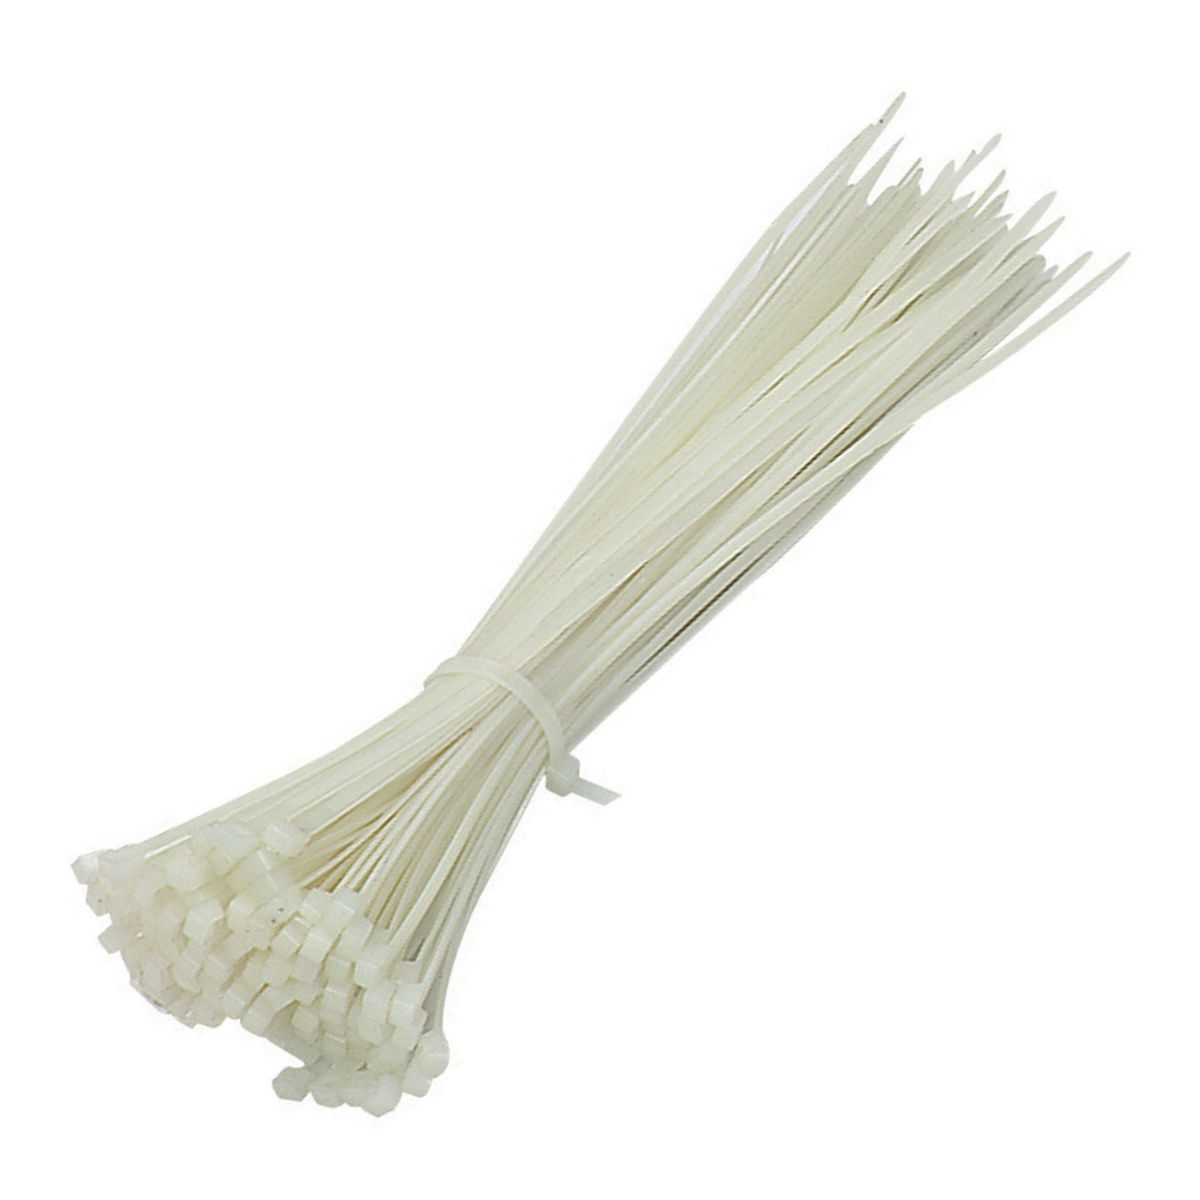 STOREHOUSE 11 In. White Cable Ties 100 Pk. – Item 60266 / 34636 / 69404